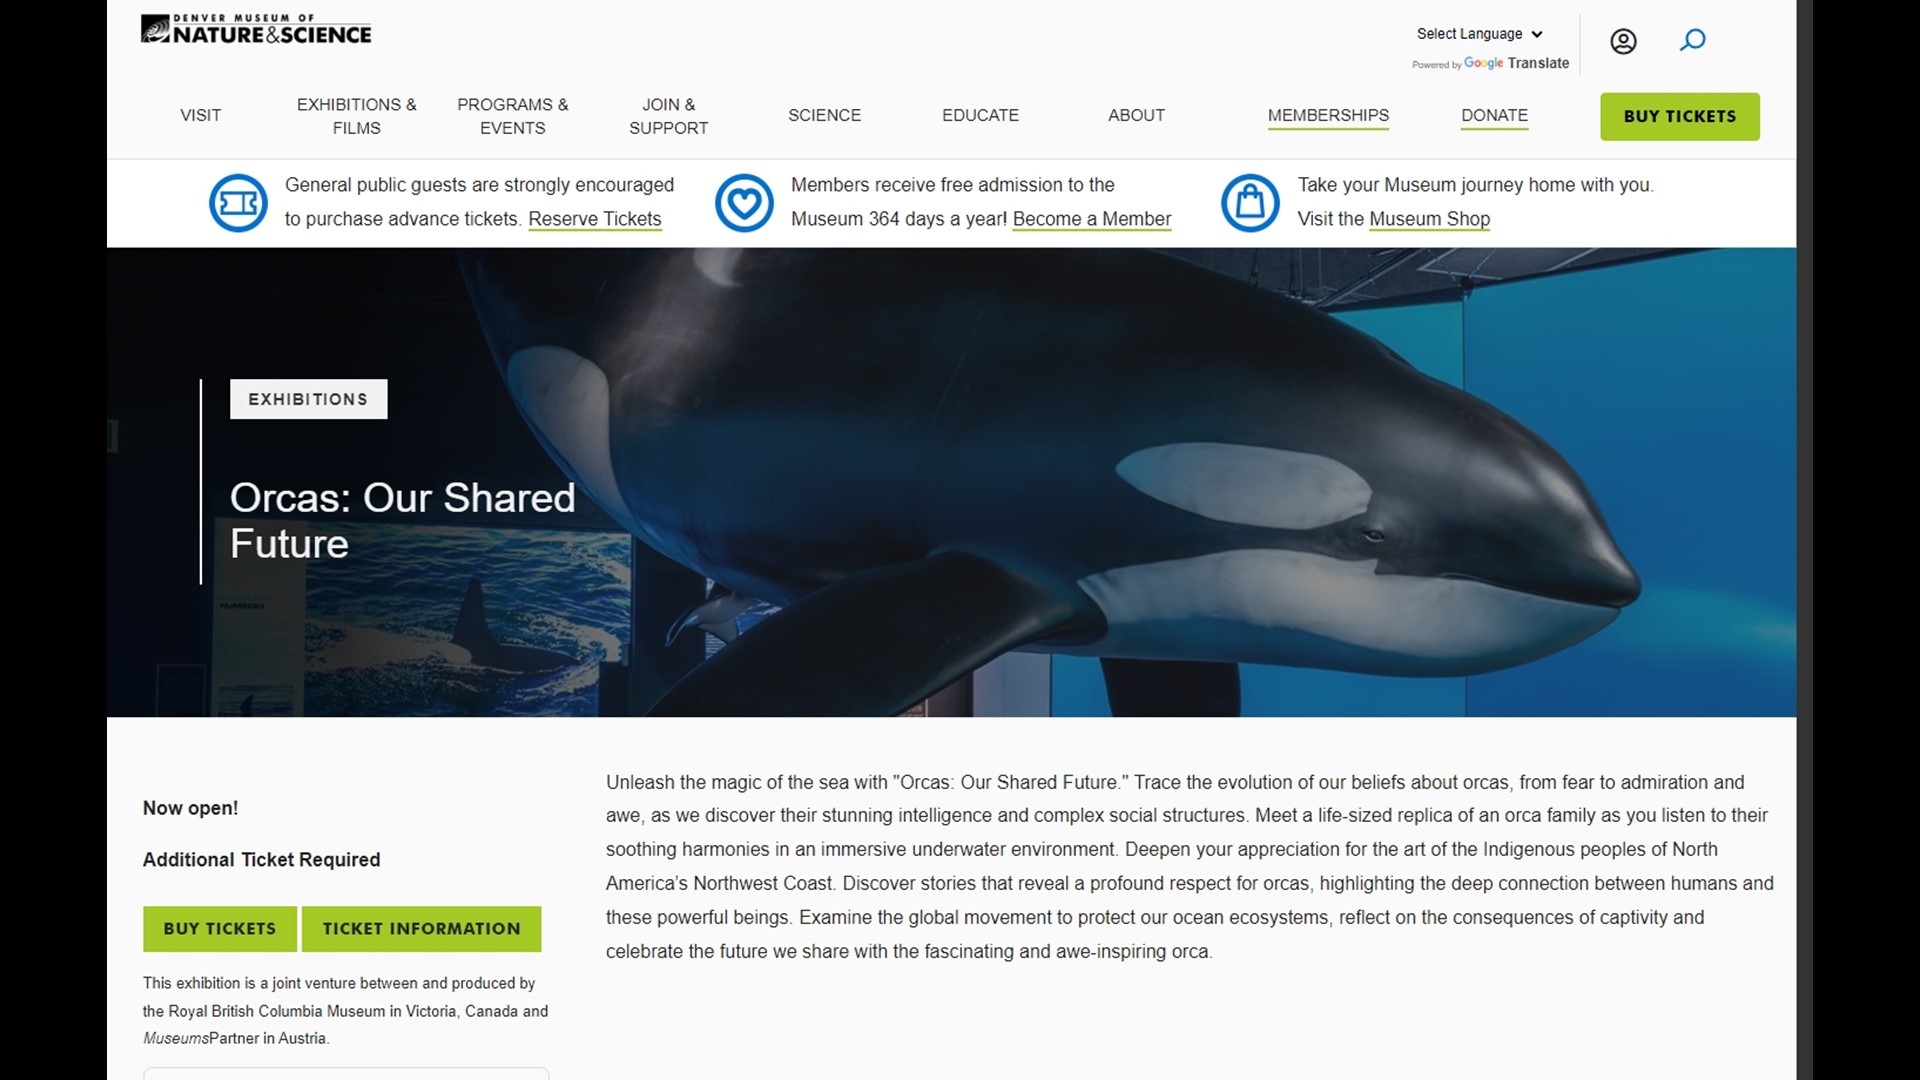 'Orcas: Our Shared Future' is now at the Denver Museum of Nature and Science. Learn more and get tickets at DMNS.org.